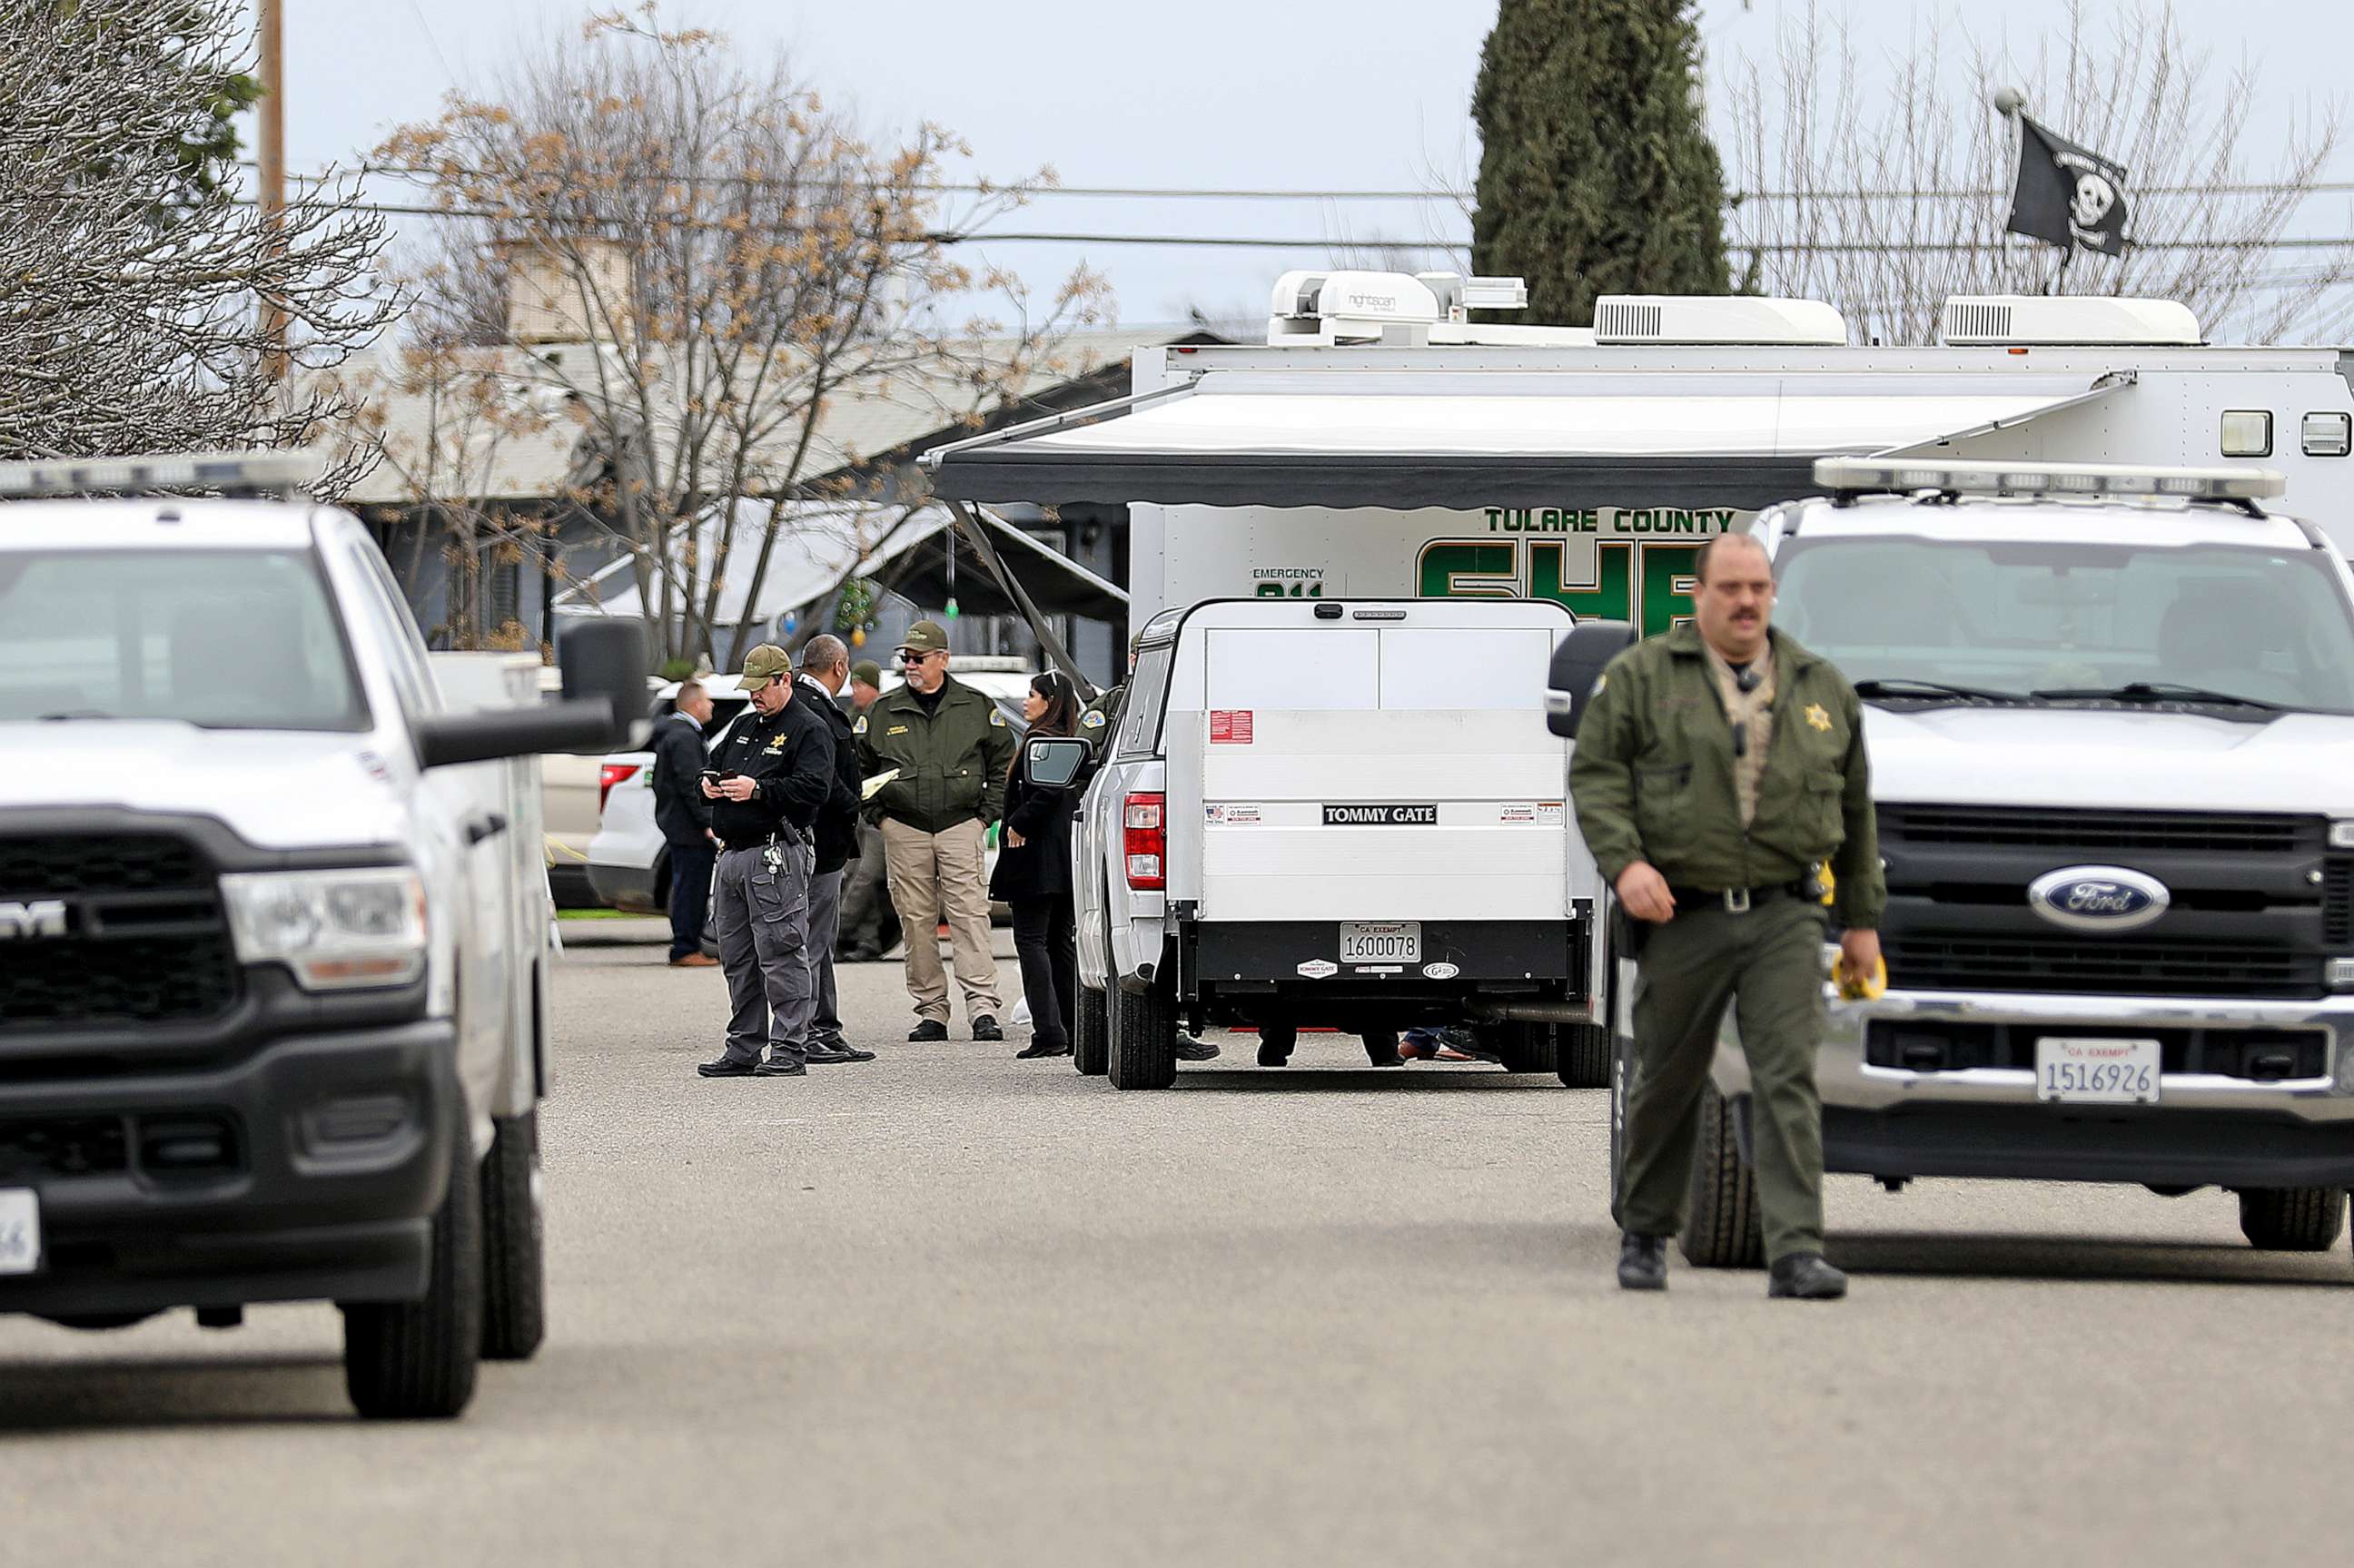 PHOTO: Tulare County Sheriff crime unit investigates the scene where six people were killed in a Central Valley farming community in what the local sheriff said was likely a targeted attack by a drug cartel, Jan. 16, 2023 in Goshen, Calif.